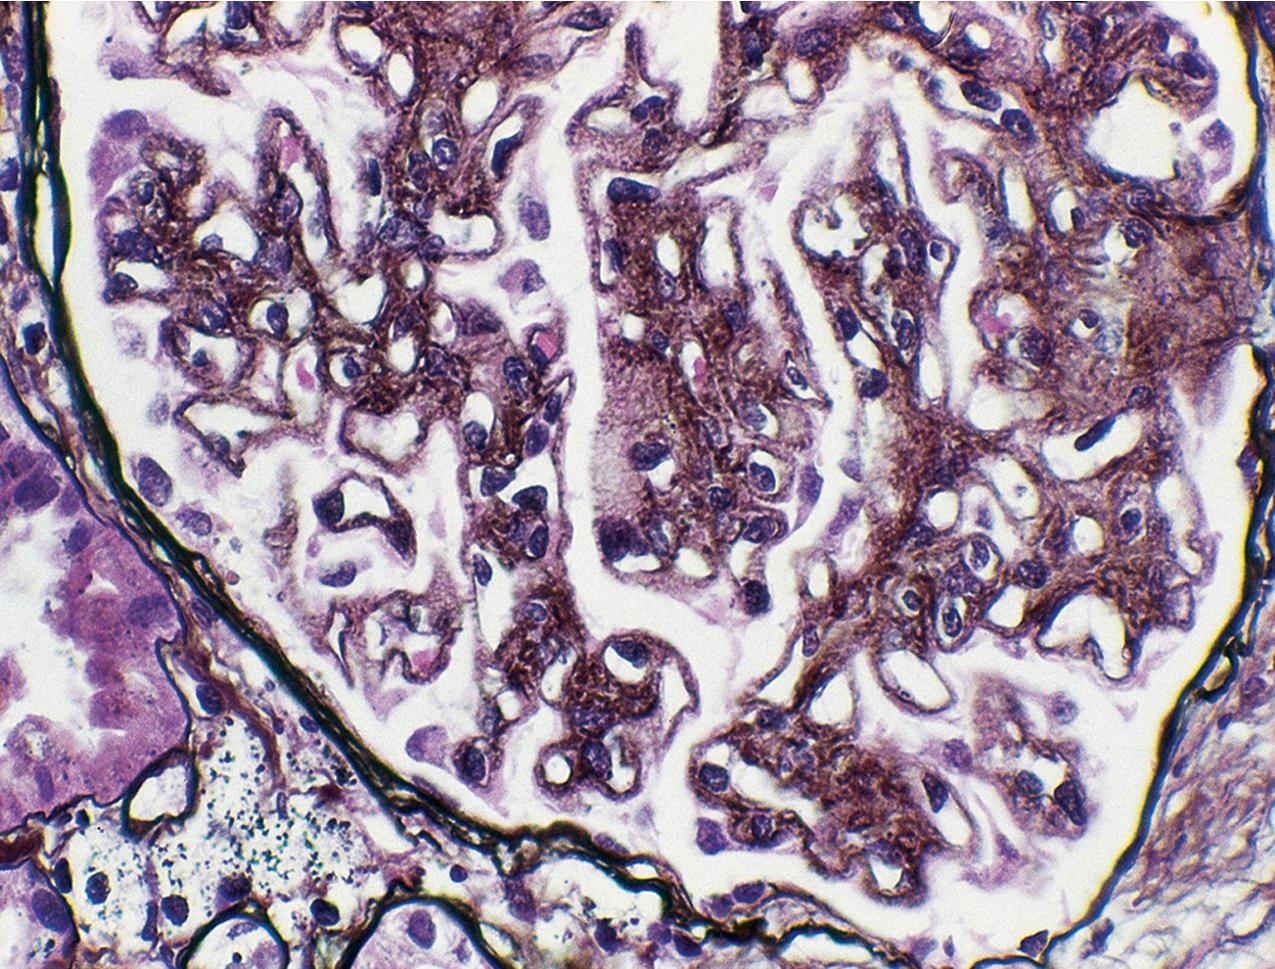 FIG. 3.91, Membranous nephropathy.